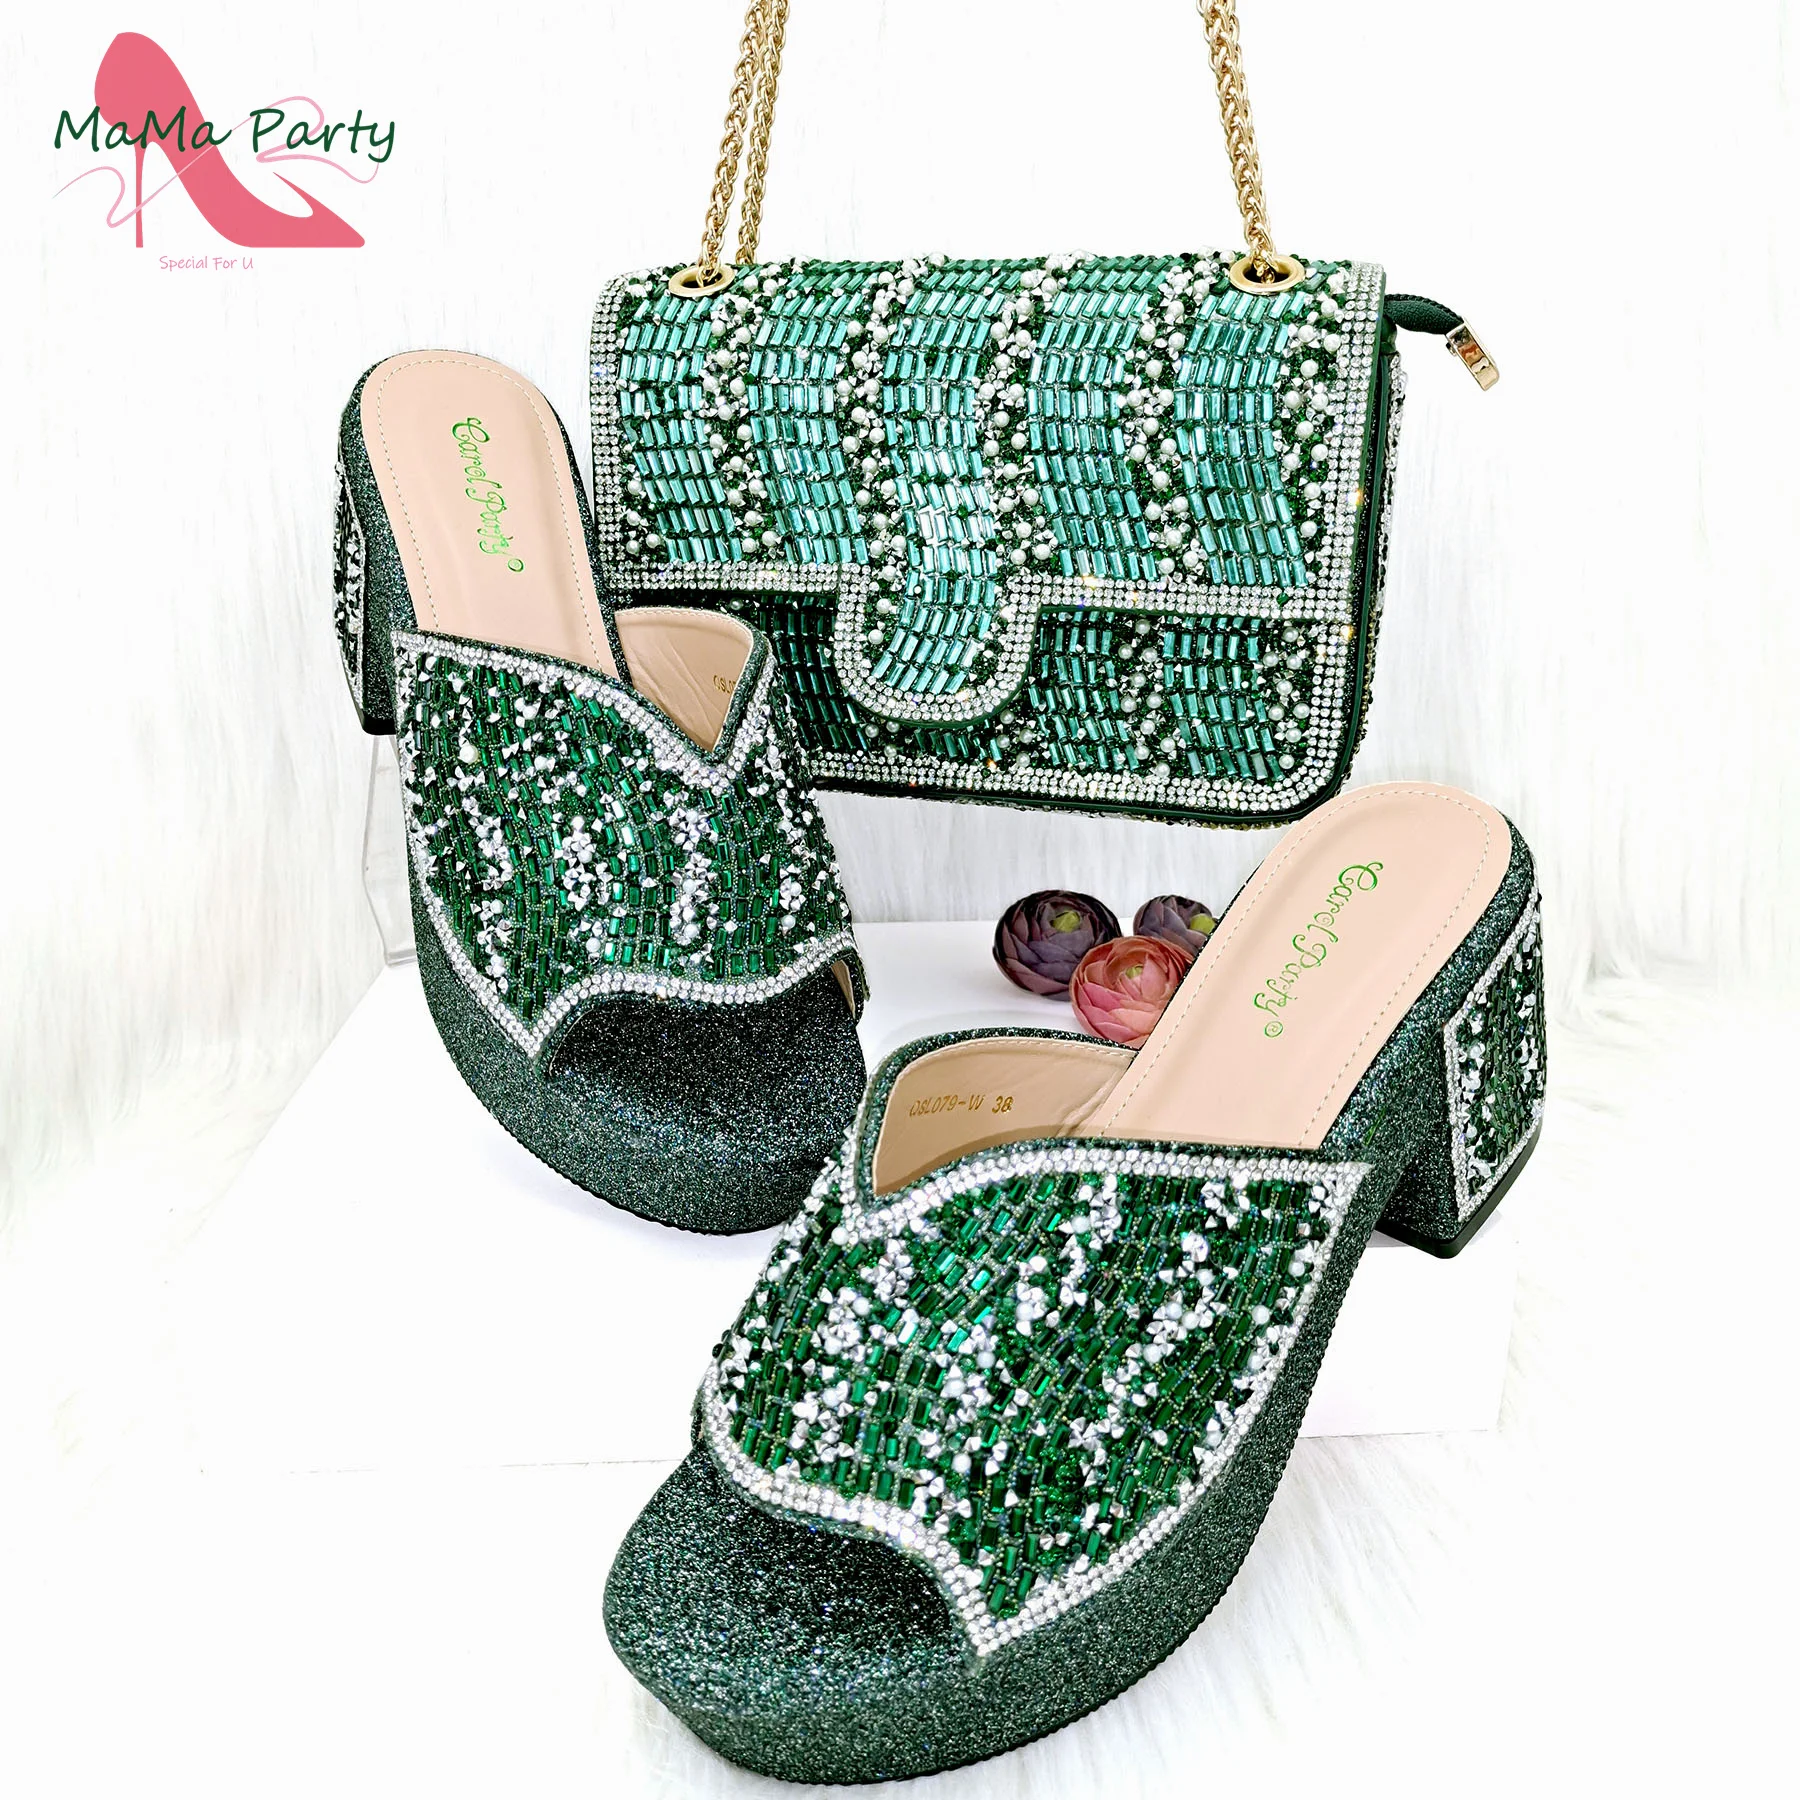 

Newest Mature Style Italian Women Shoes and Bag Set in Green Color with Shinning Crystal Nigerian Girls Shoes for Dress